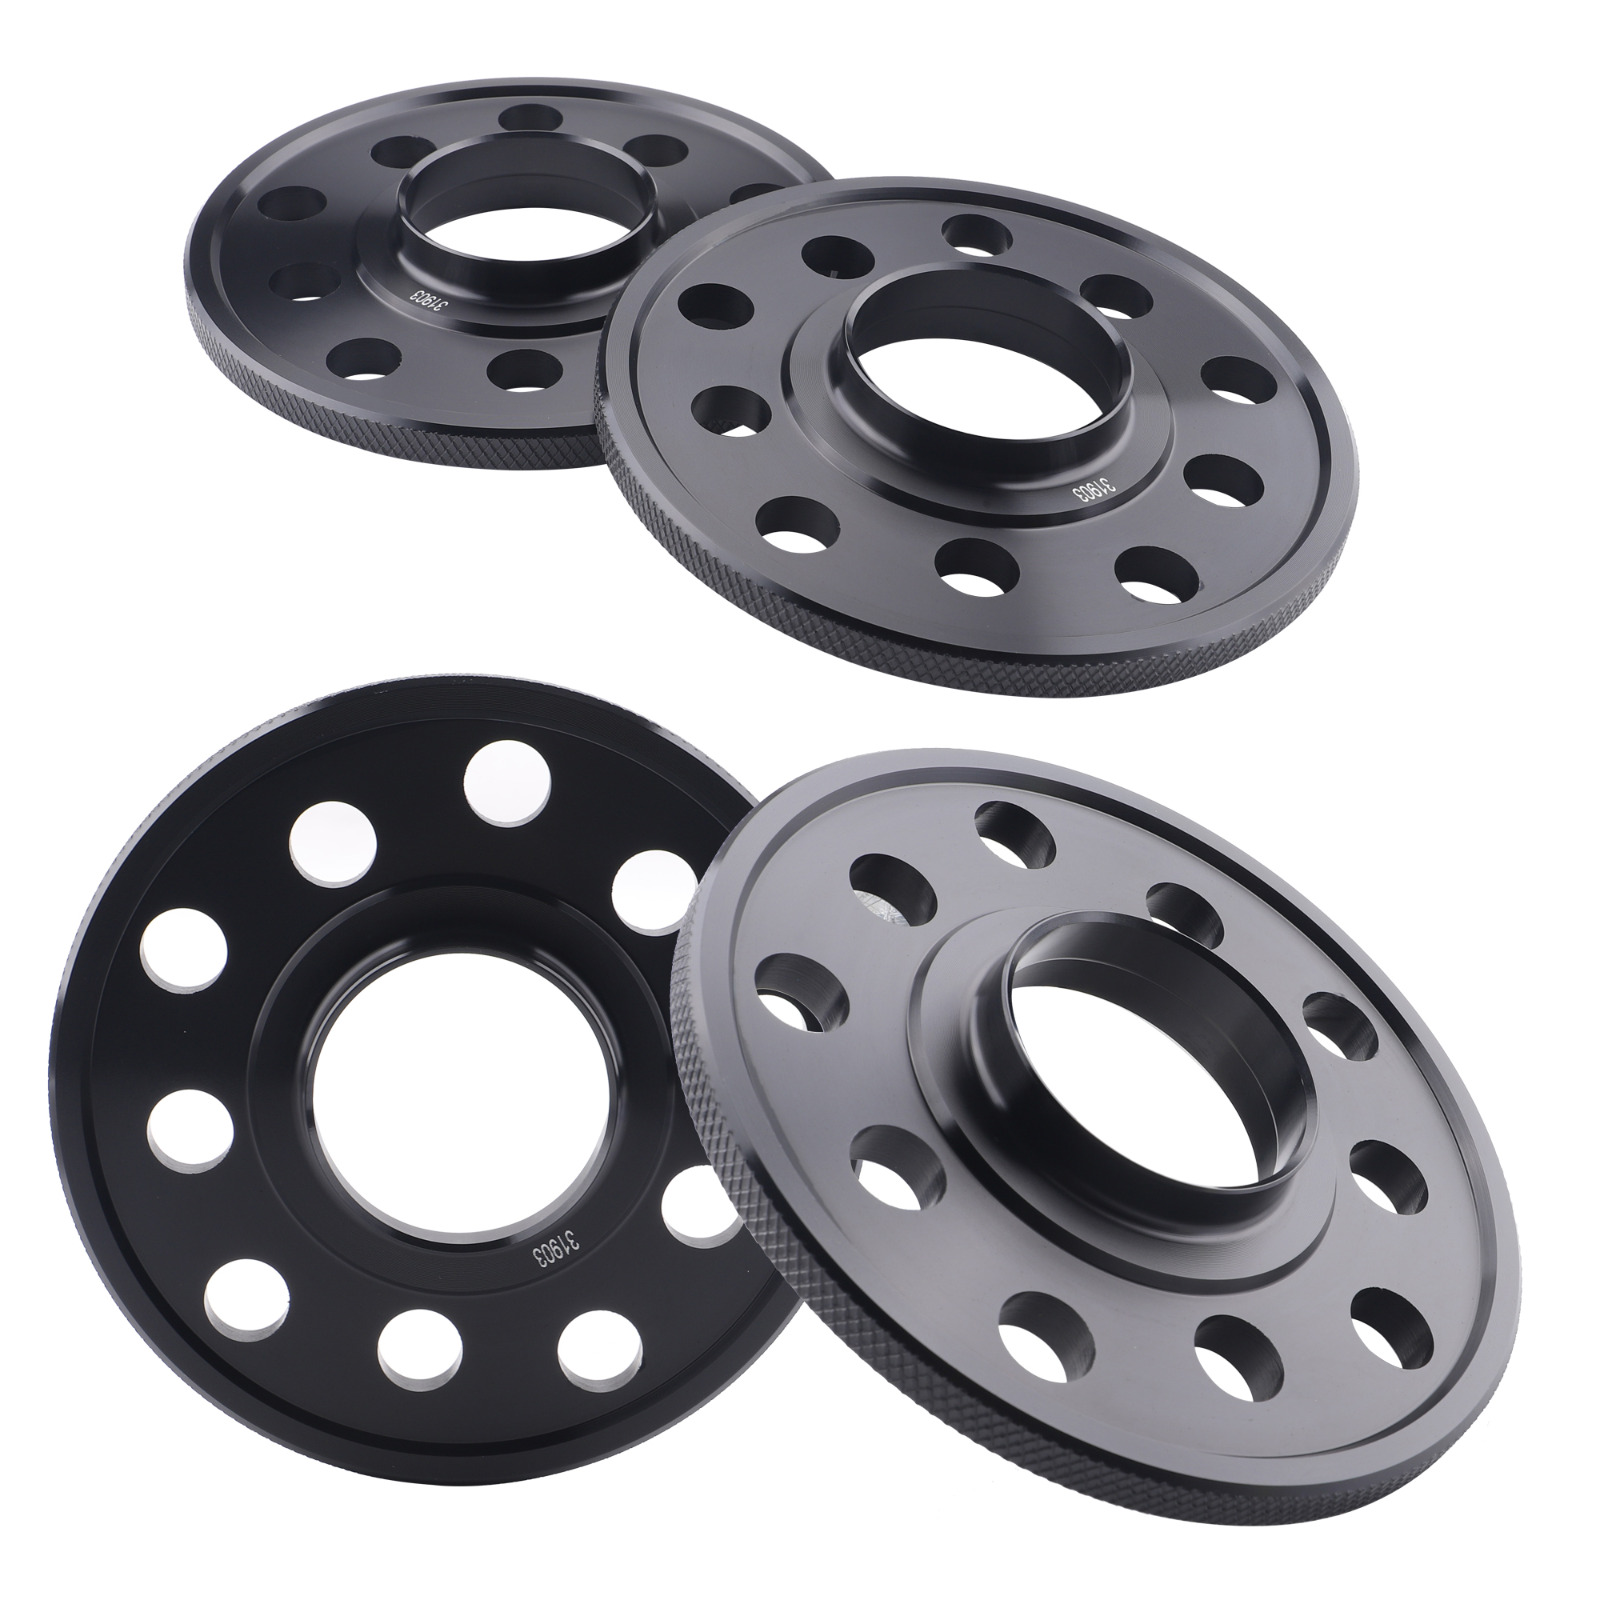 4PC 12mm 5x100/5x112 Wheel Spacers 57.1mm Hubcentric for Audi Golf GTI Beetle CC